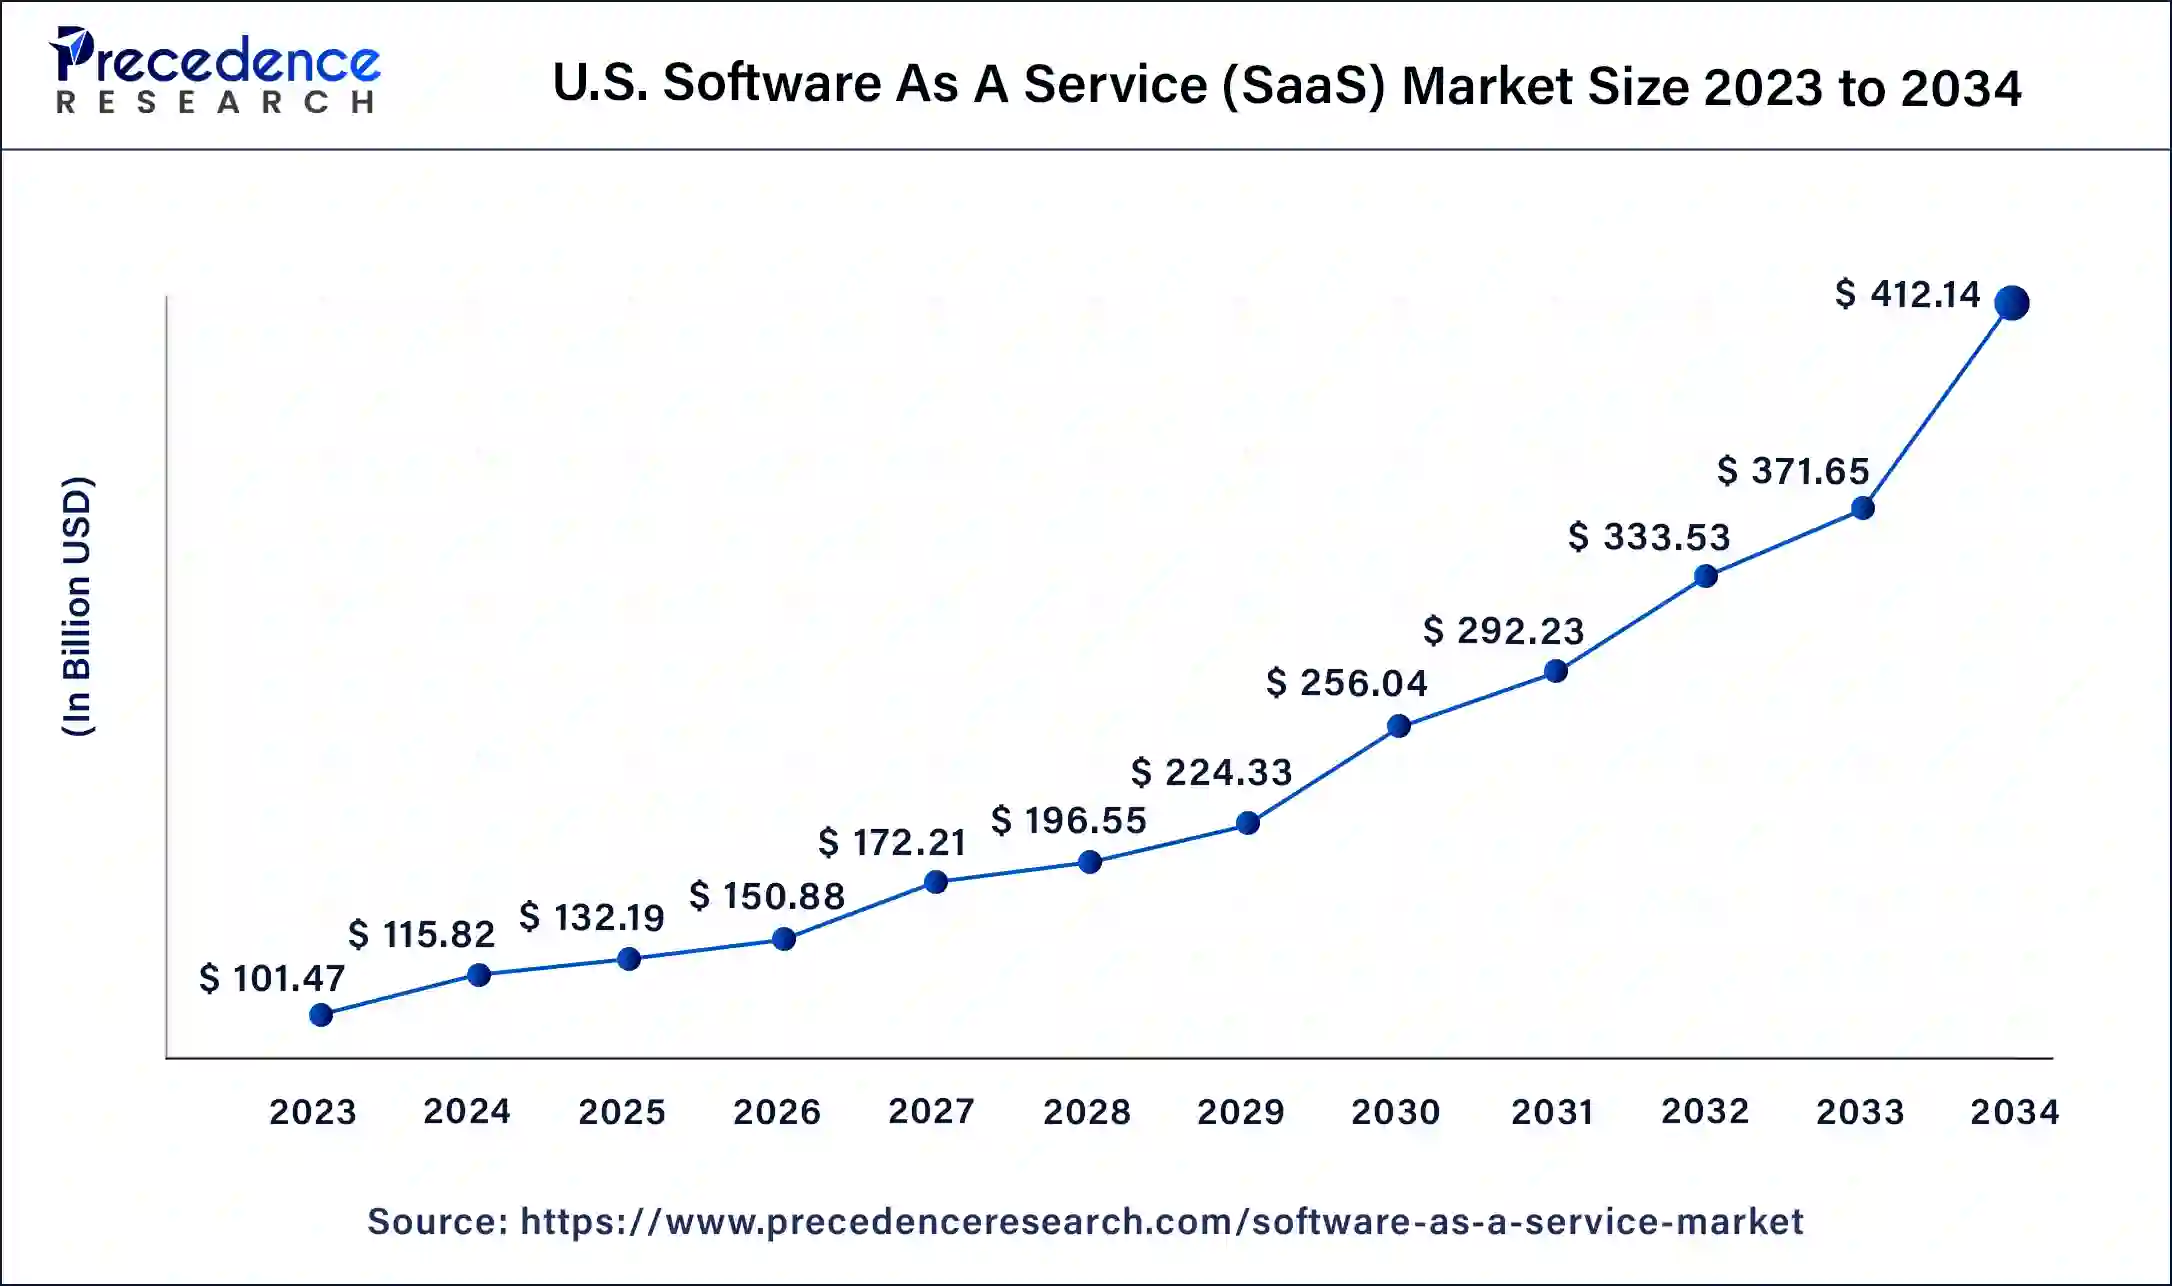 U.S. Software As A Service (SaaS) Market Size 2024 to 2034